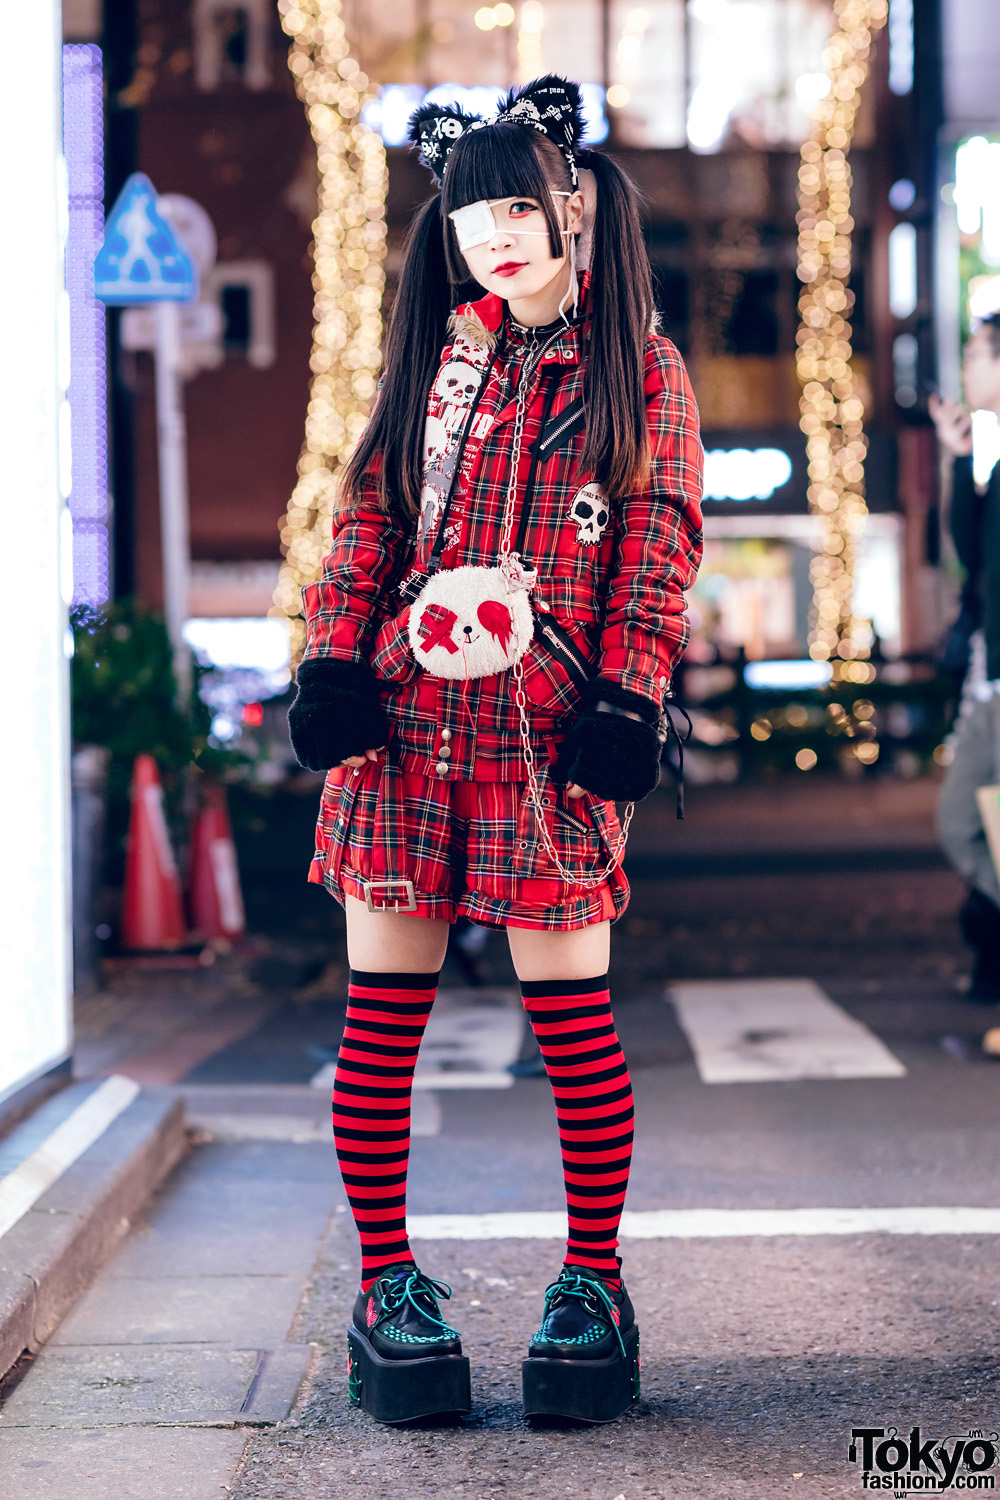 Harajuku Goth Girl in Red Plaid Street Fashion w/ Twin Tails, Cat Ears, Mad...